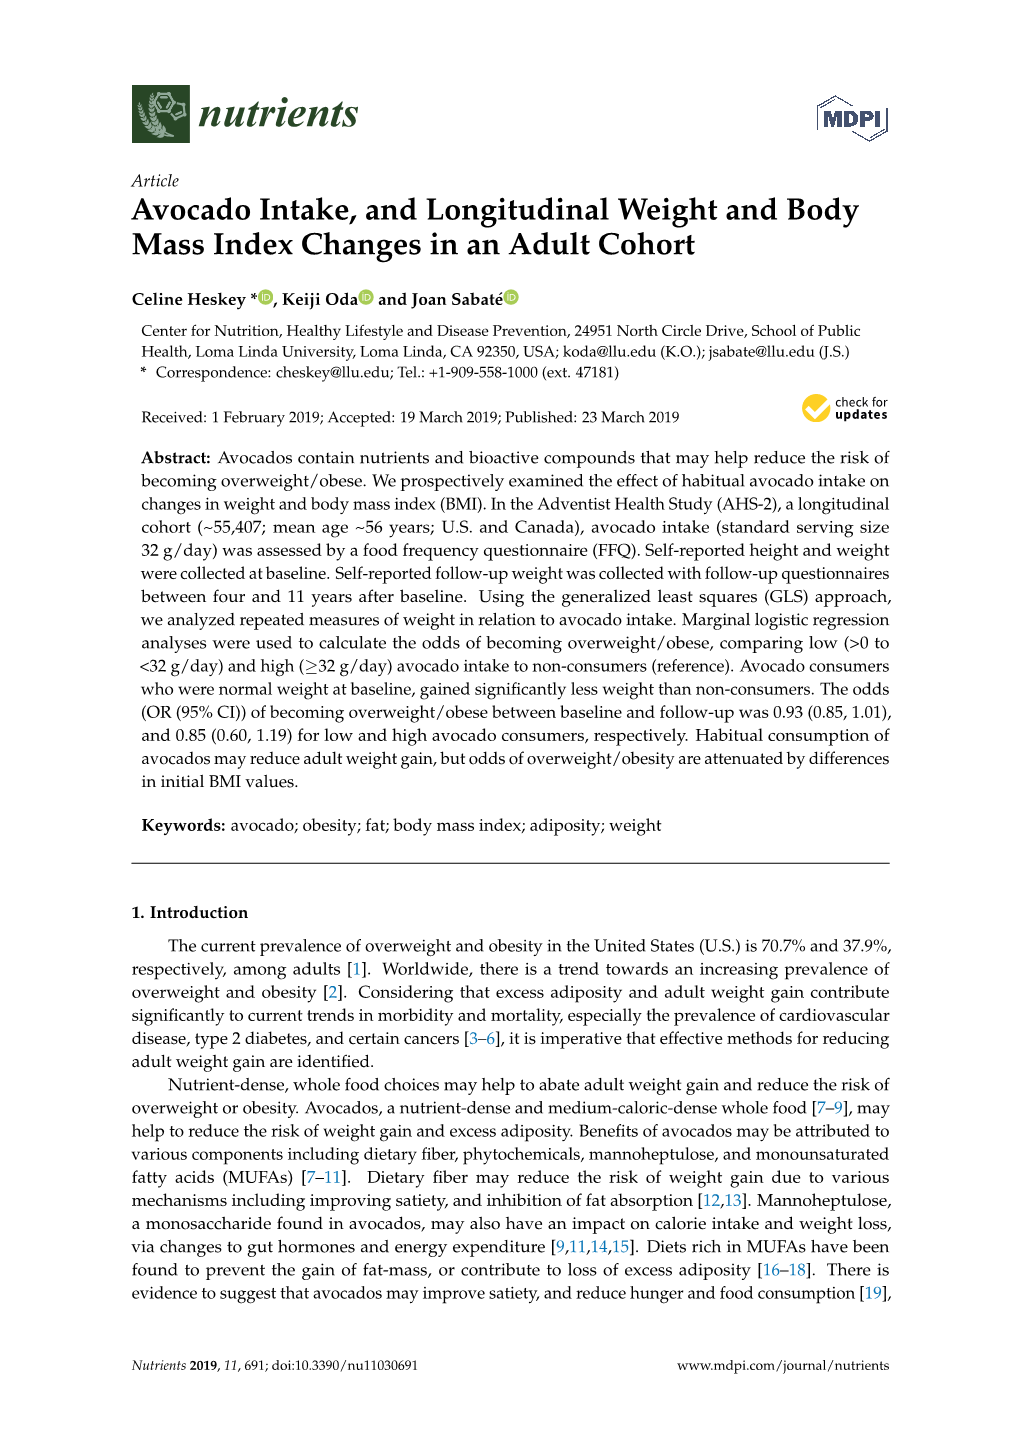 Avocado Intake, and Longitudinal Weight and Body Mass Index Changes in an Adult Cohort